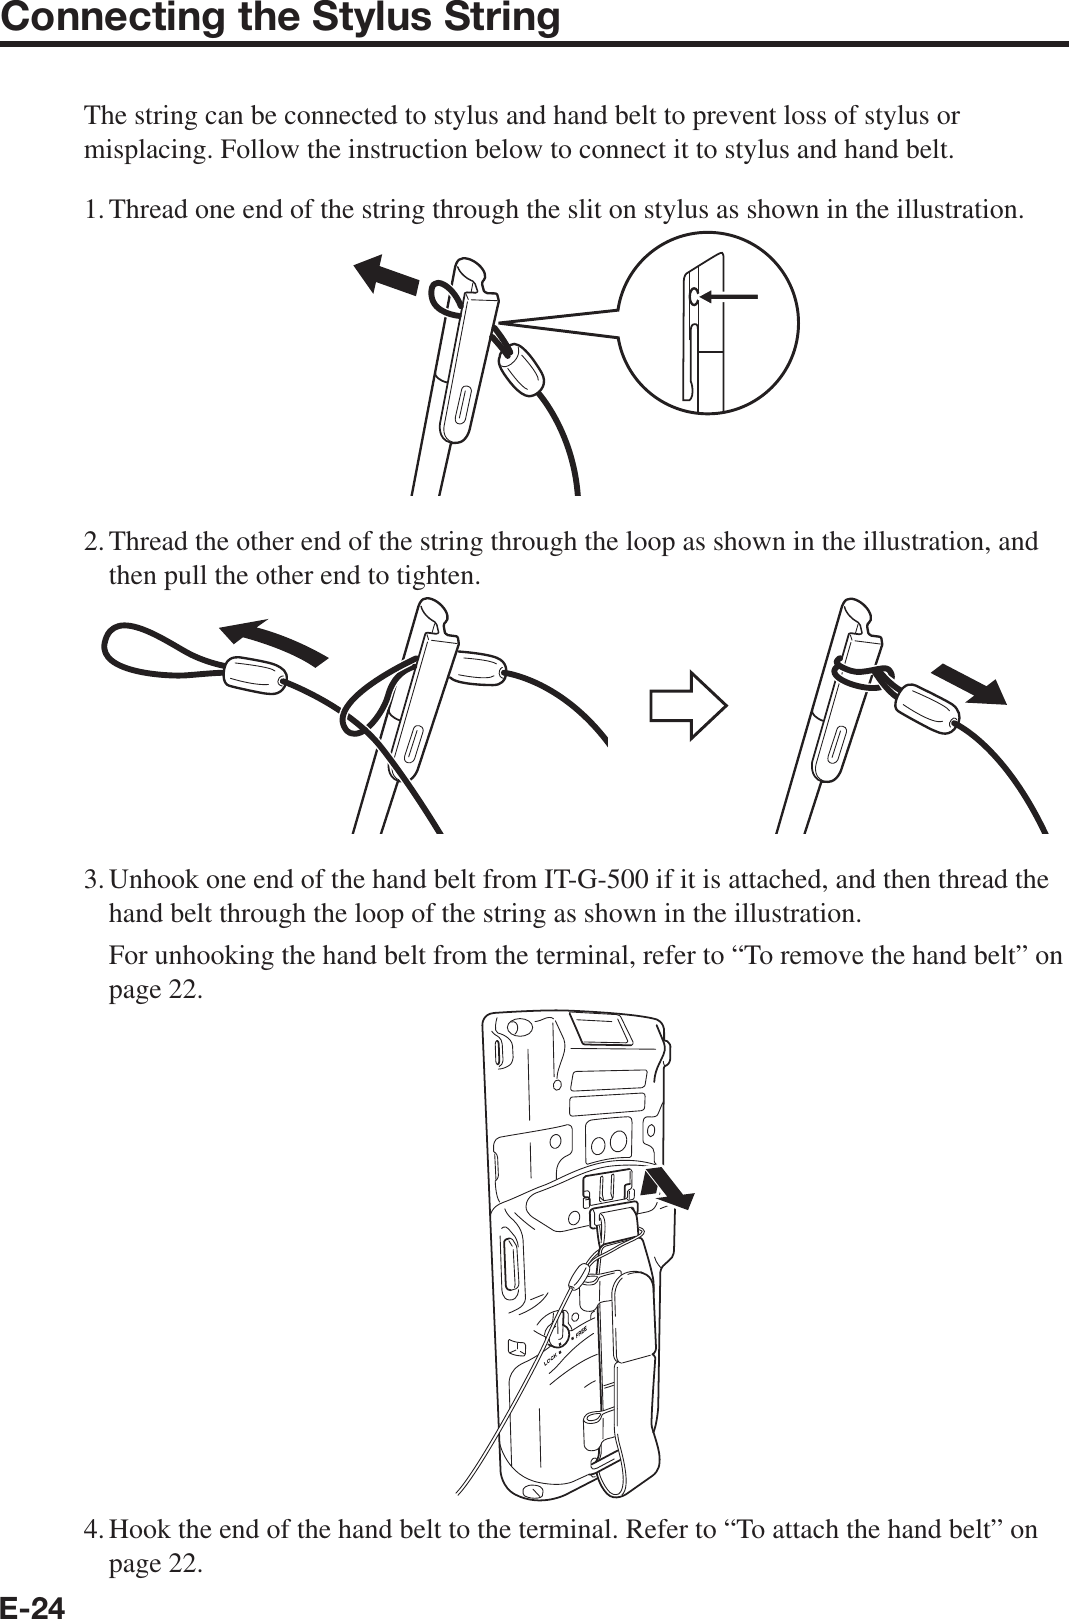 E-24Connecting the Stylus StringThe string can be connected to stylus and hand belt to prevent loss of stylus or misplacing. Follow the instruction below to connect it to stylus and hand belt.1. Thread one end of the string through the slit on stylus as shown in the illustration.2. Thread the other end of the string through the loop as shown in the illustration, and then pull the other end to tighten.3. Unhook one end of the hand belt from IT-G-500 if it is attached, and then thread the hand belt through the loop of the string as shown in the illustration.  For unhooking the hand belt from the terminal, refer to “To remove the hand belt” on page 22.4. Hook the end of the hand belt to the terminal. Refer to “To attach the hand belt” on page 22.